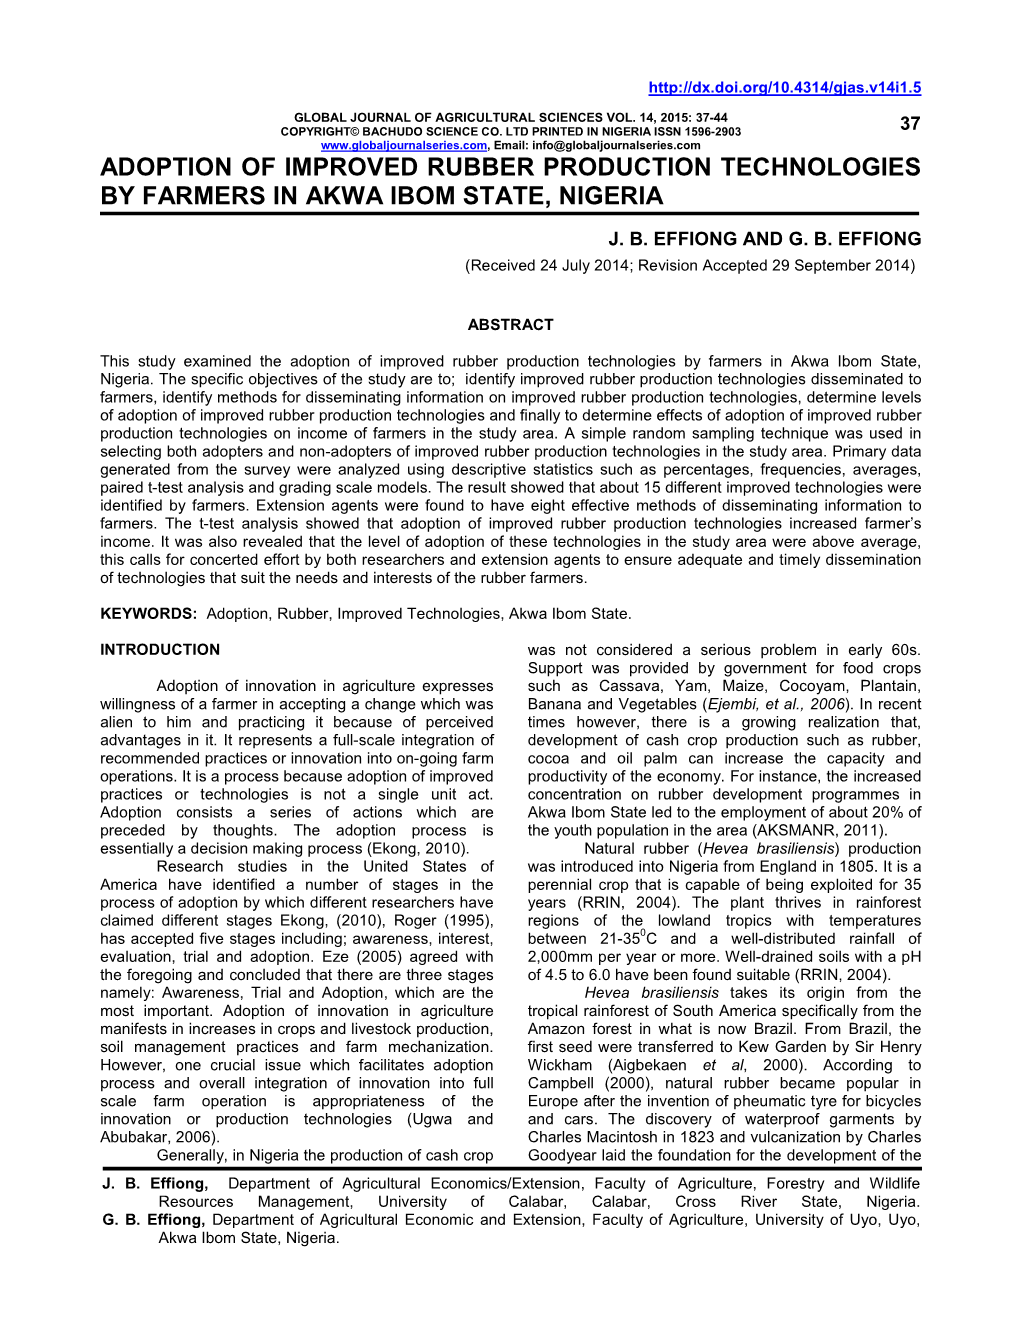 Adoption of Improved Rubber Production Technologies by Farmers in Akwa Ibom State, Nigeria